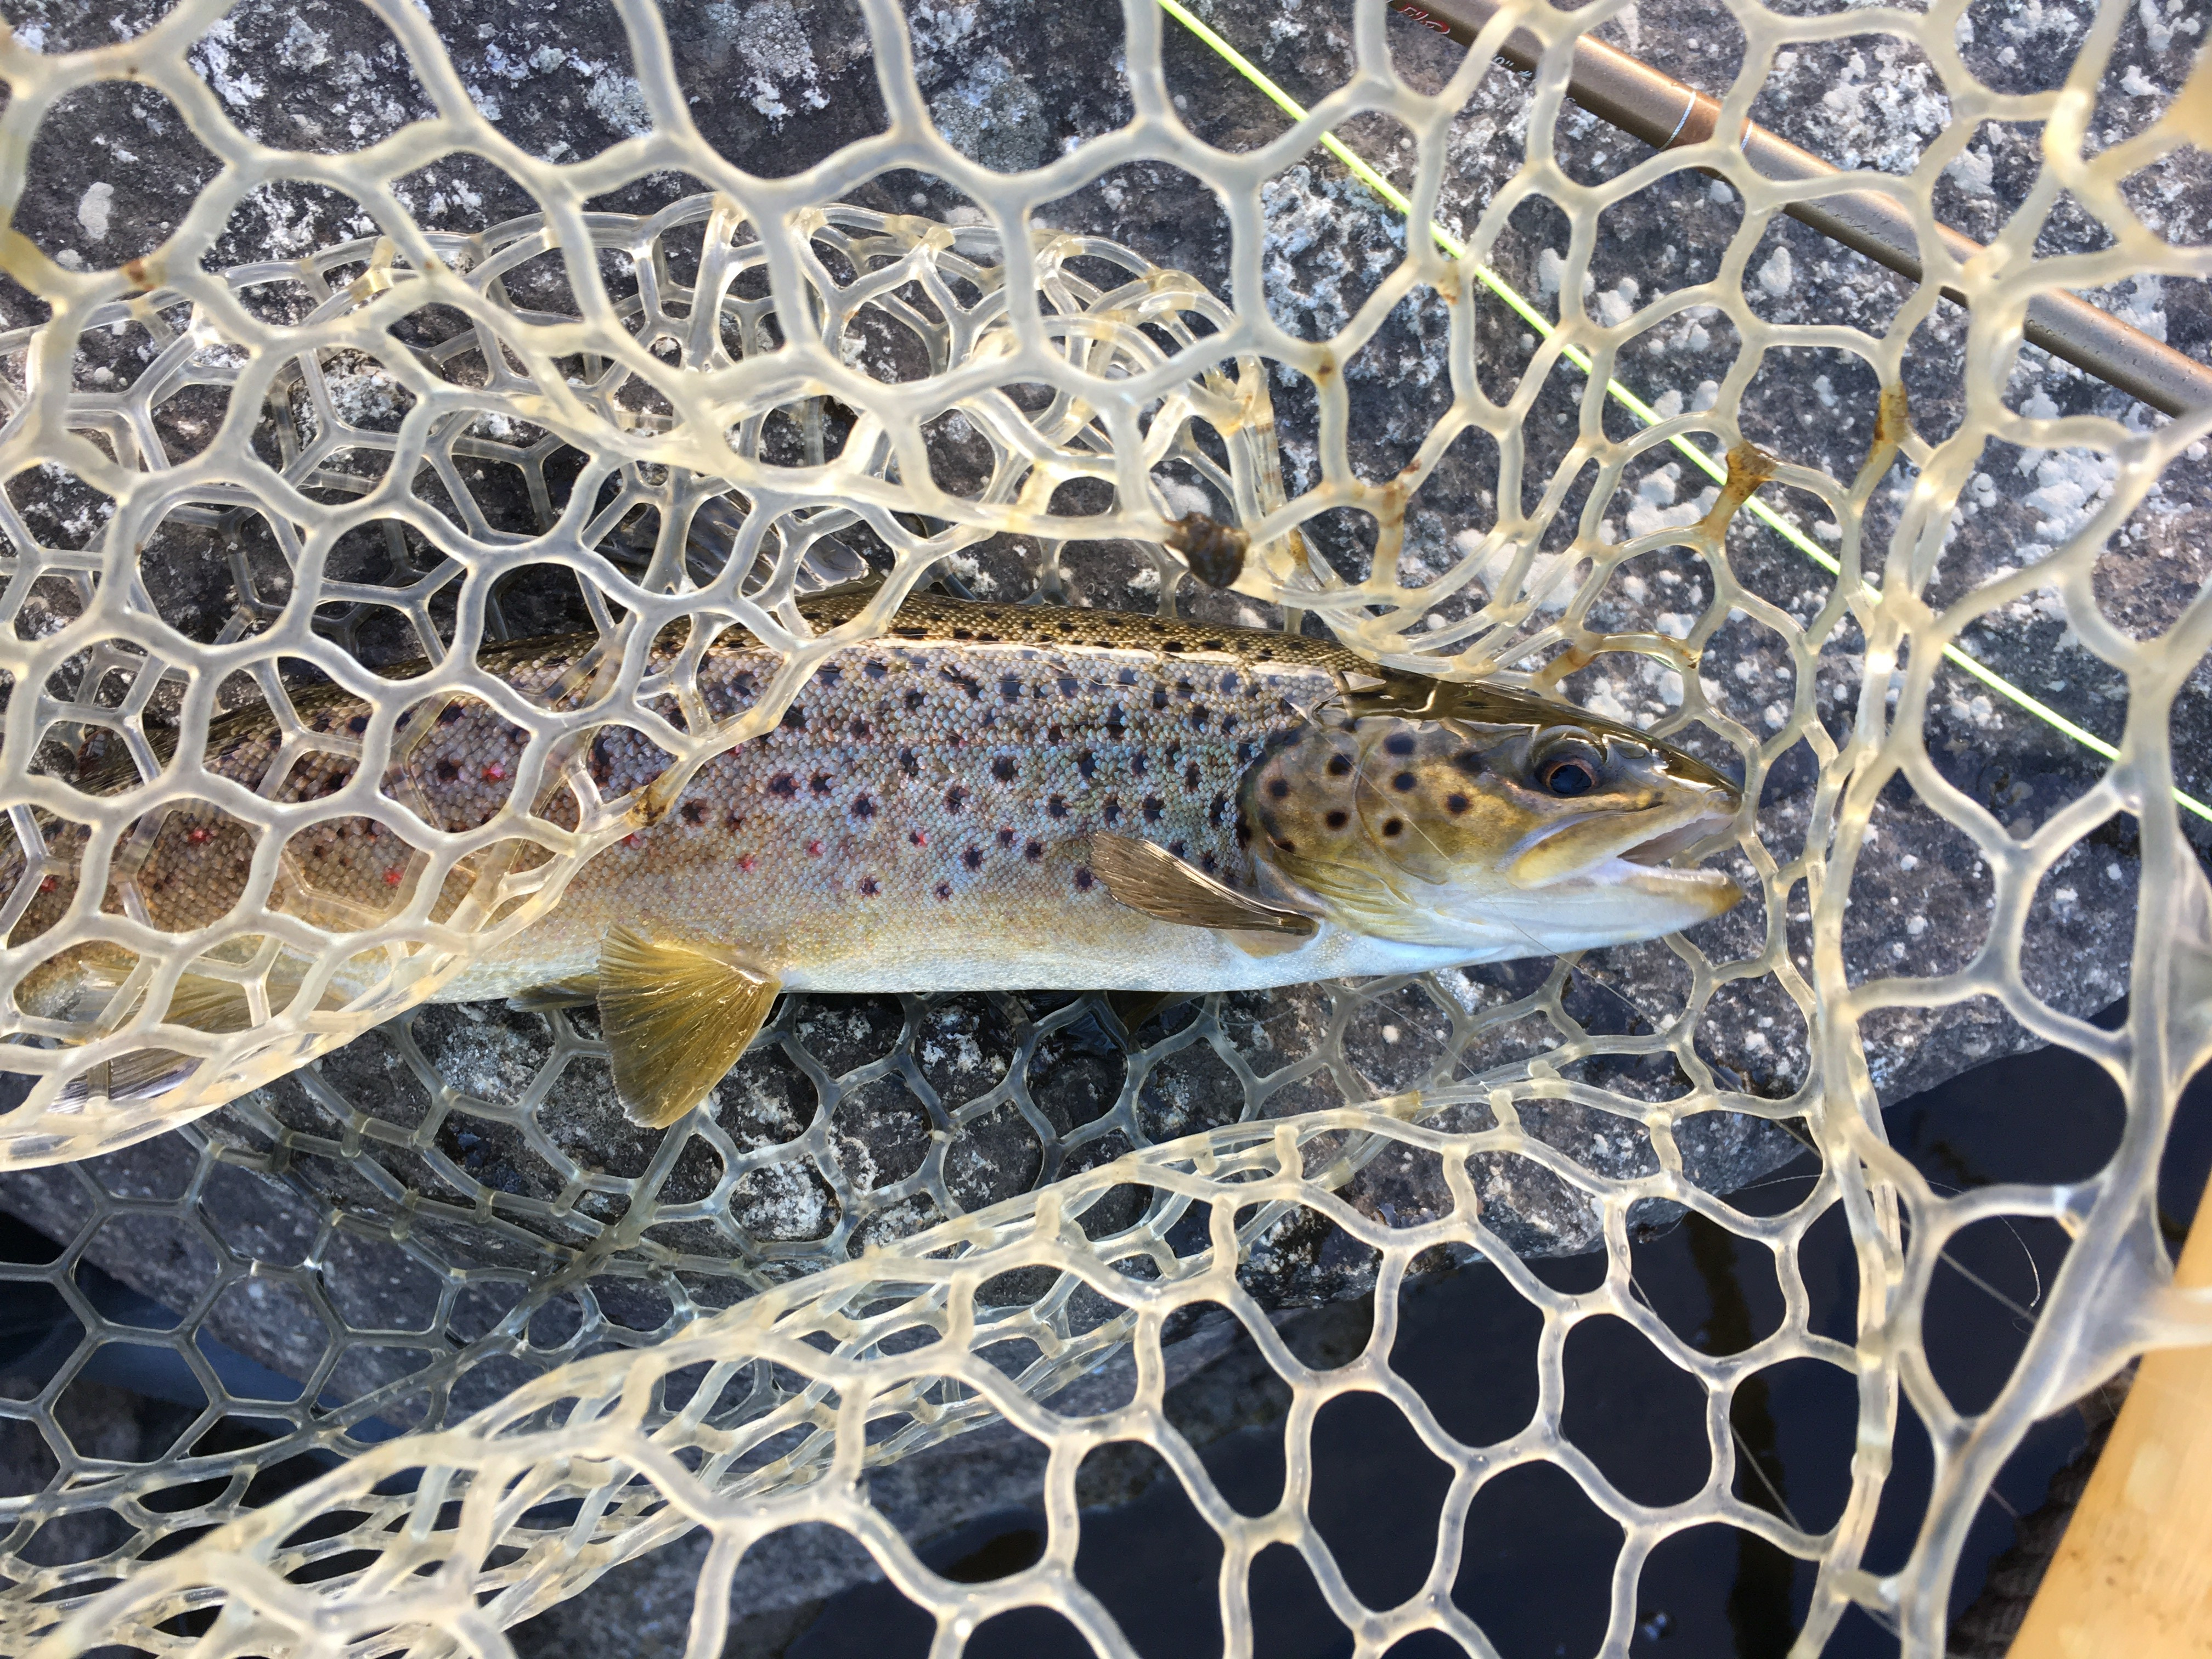 Tony's 10.5-Inch Brown Trout